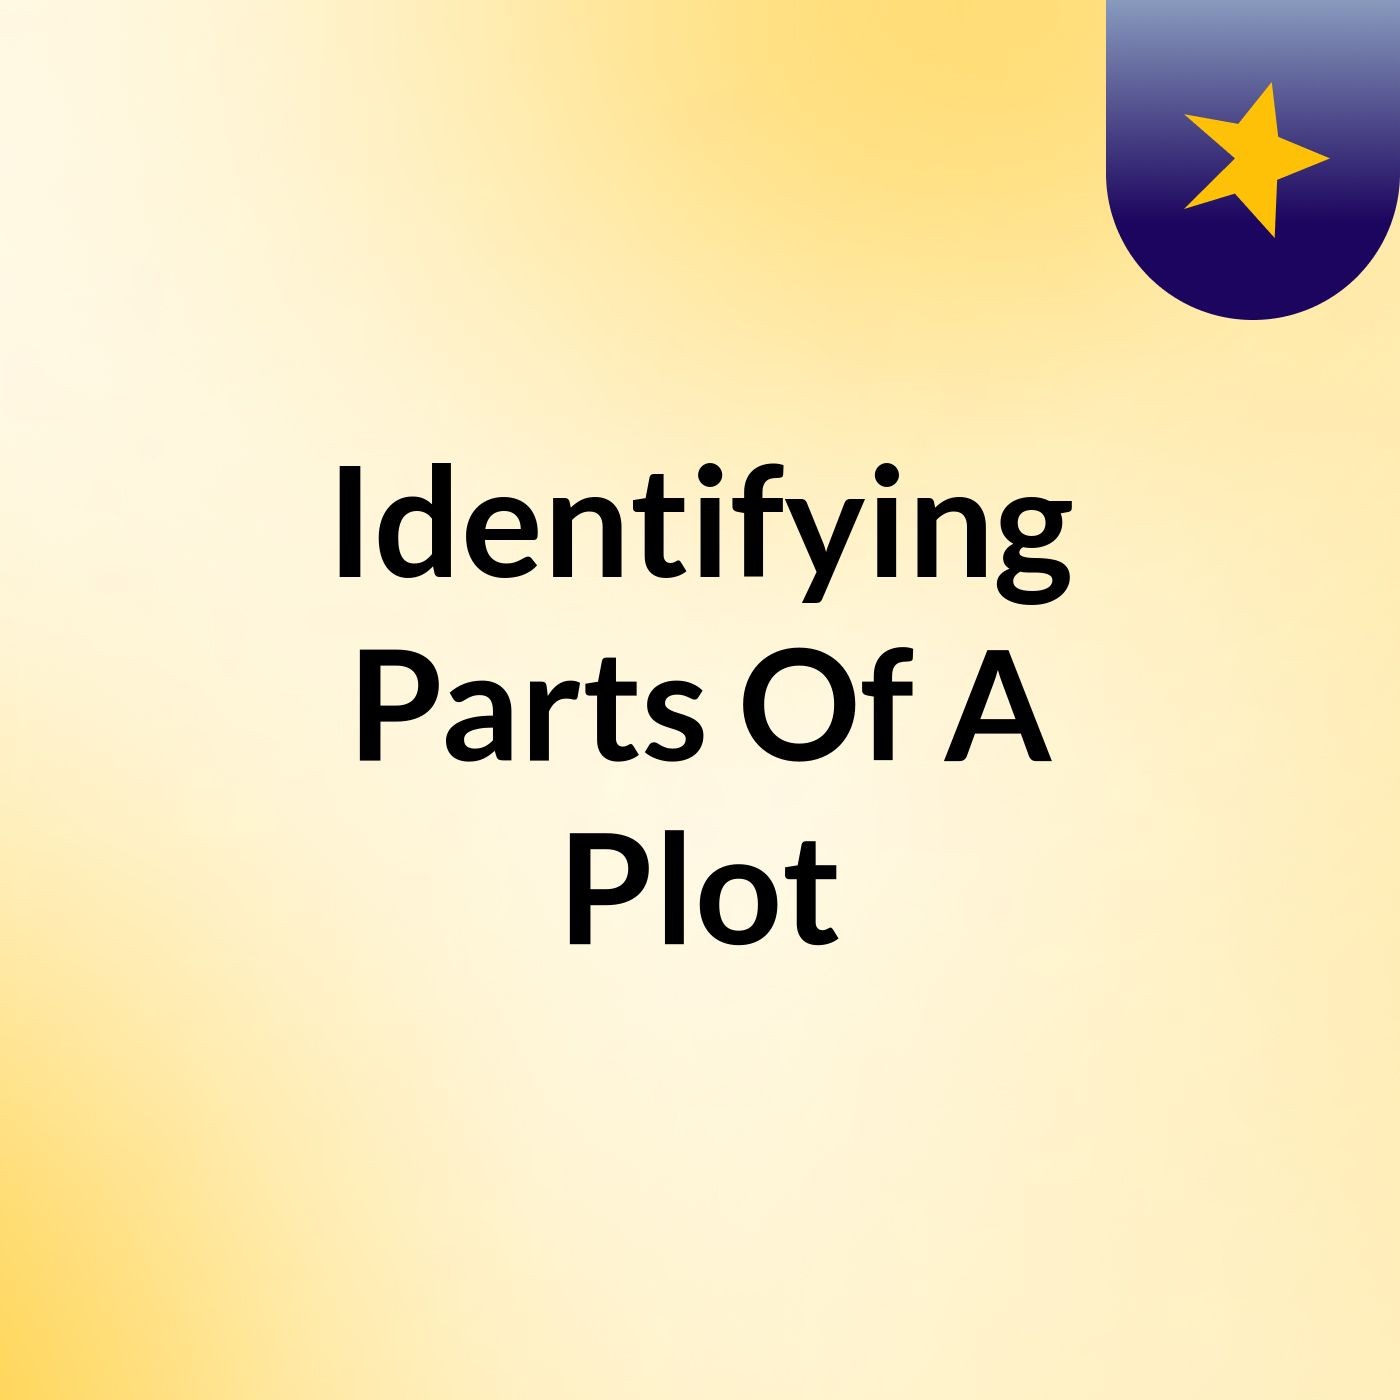 Identifying Parts Of A Plot